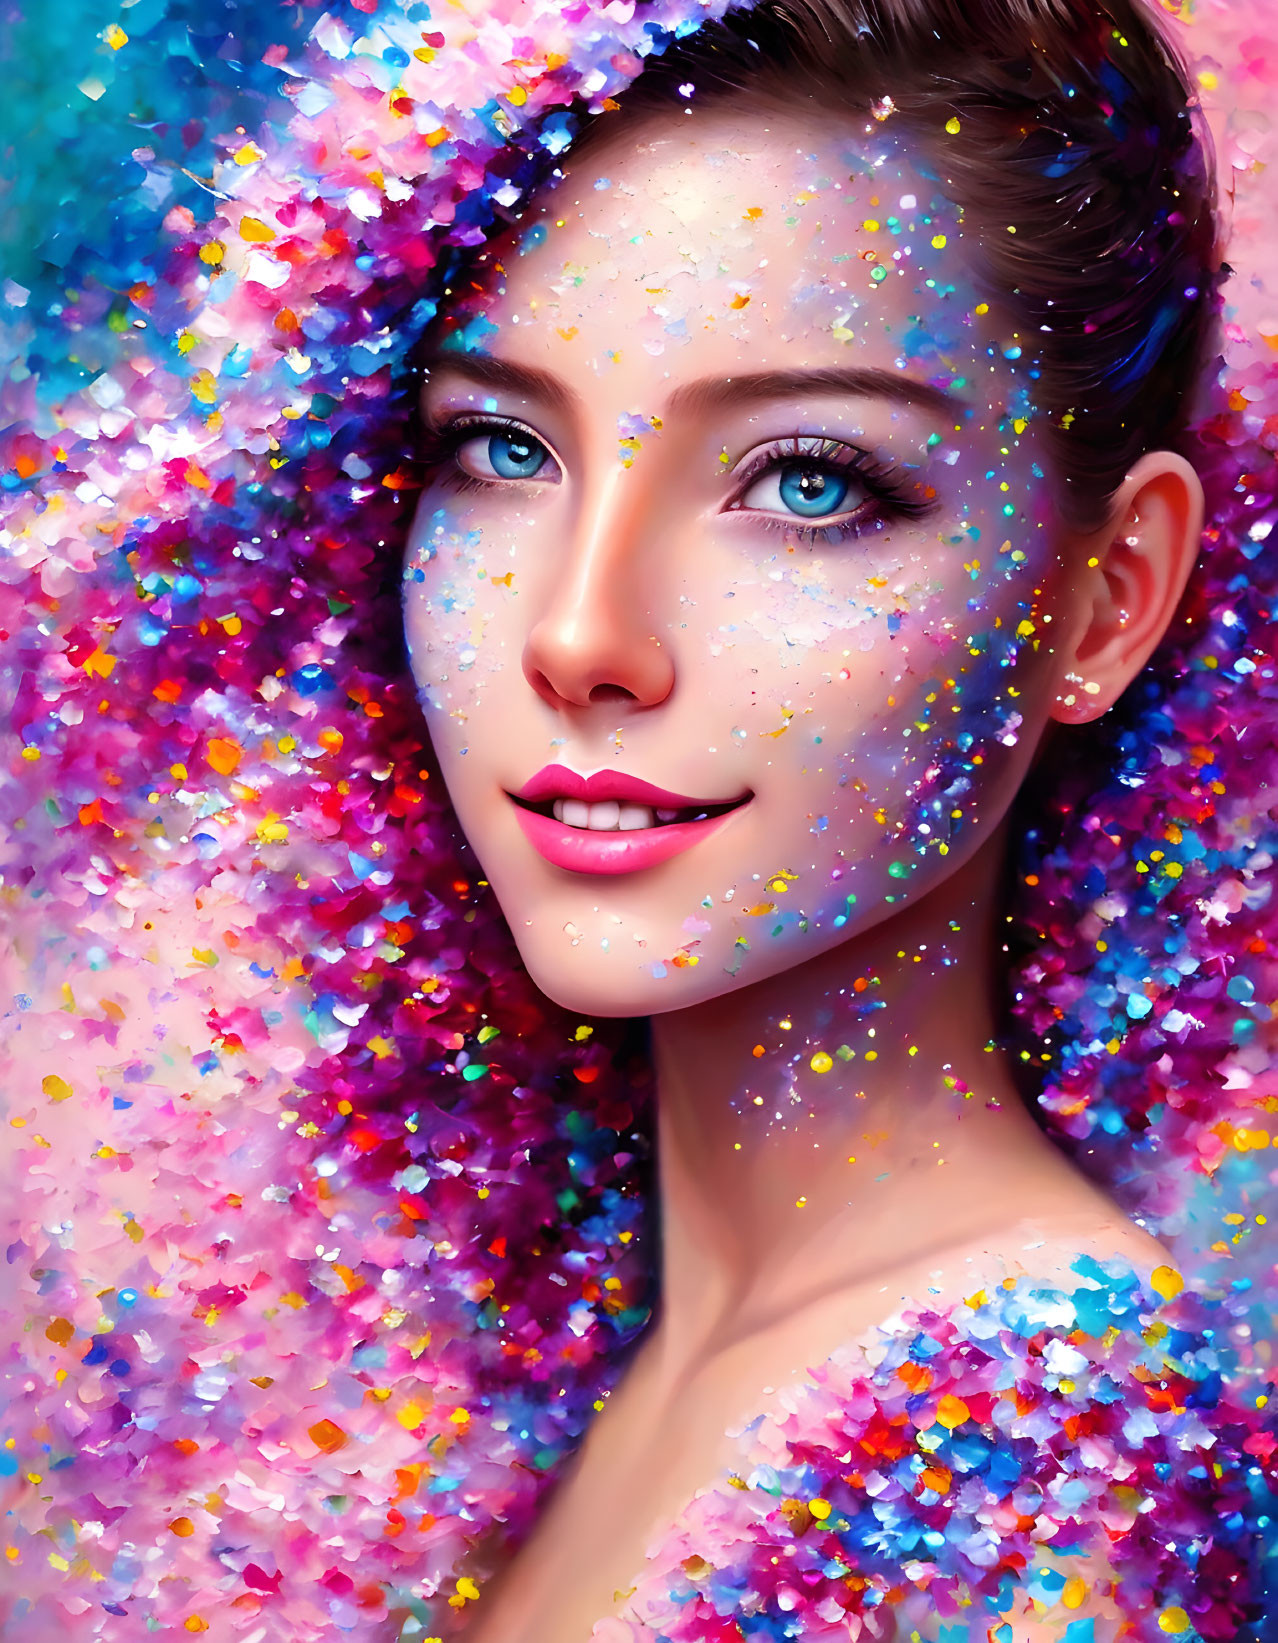 Colorful digital portrait of a woman with multicolor confetti textures and a smiling gaze